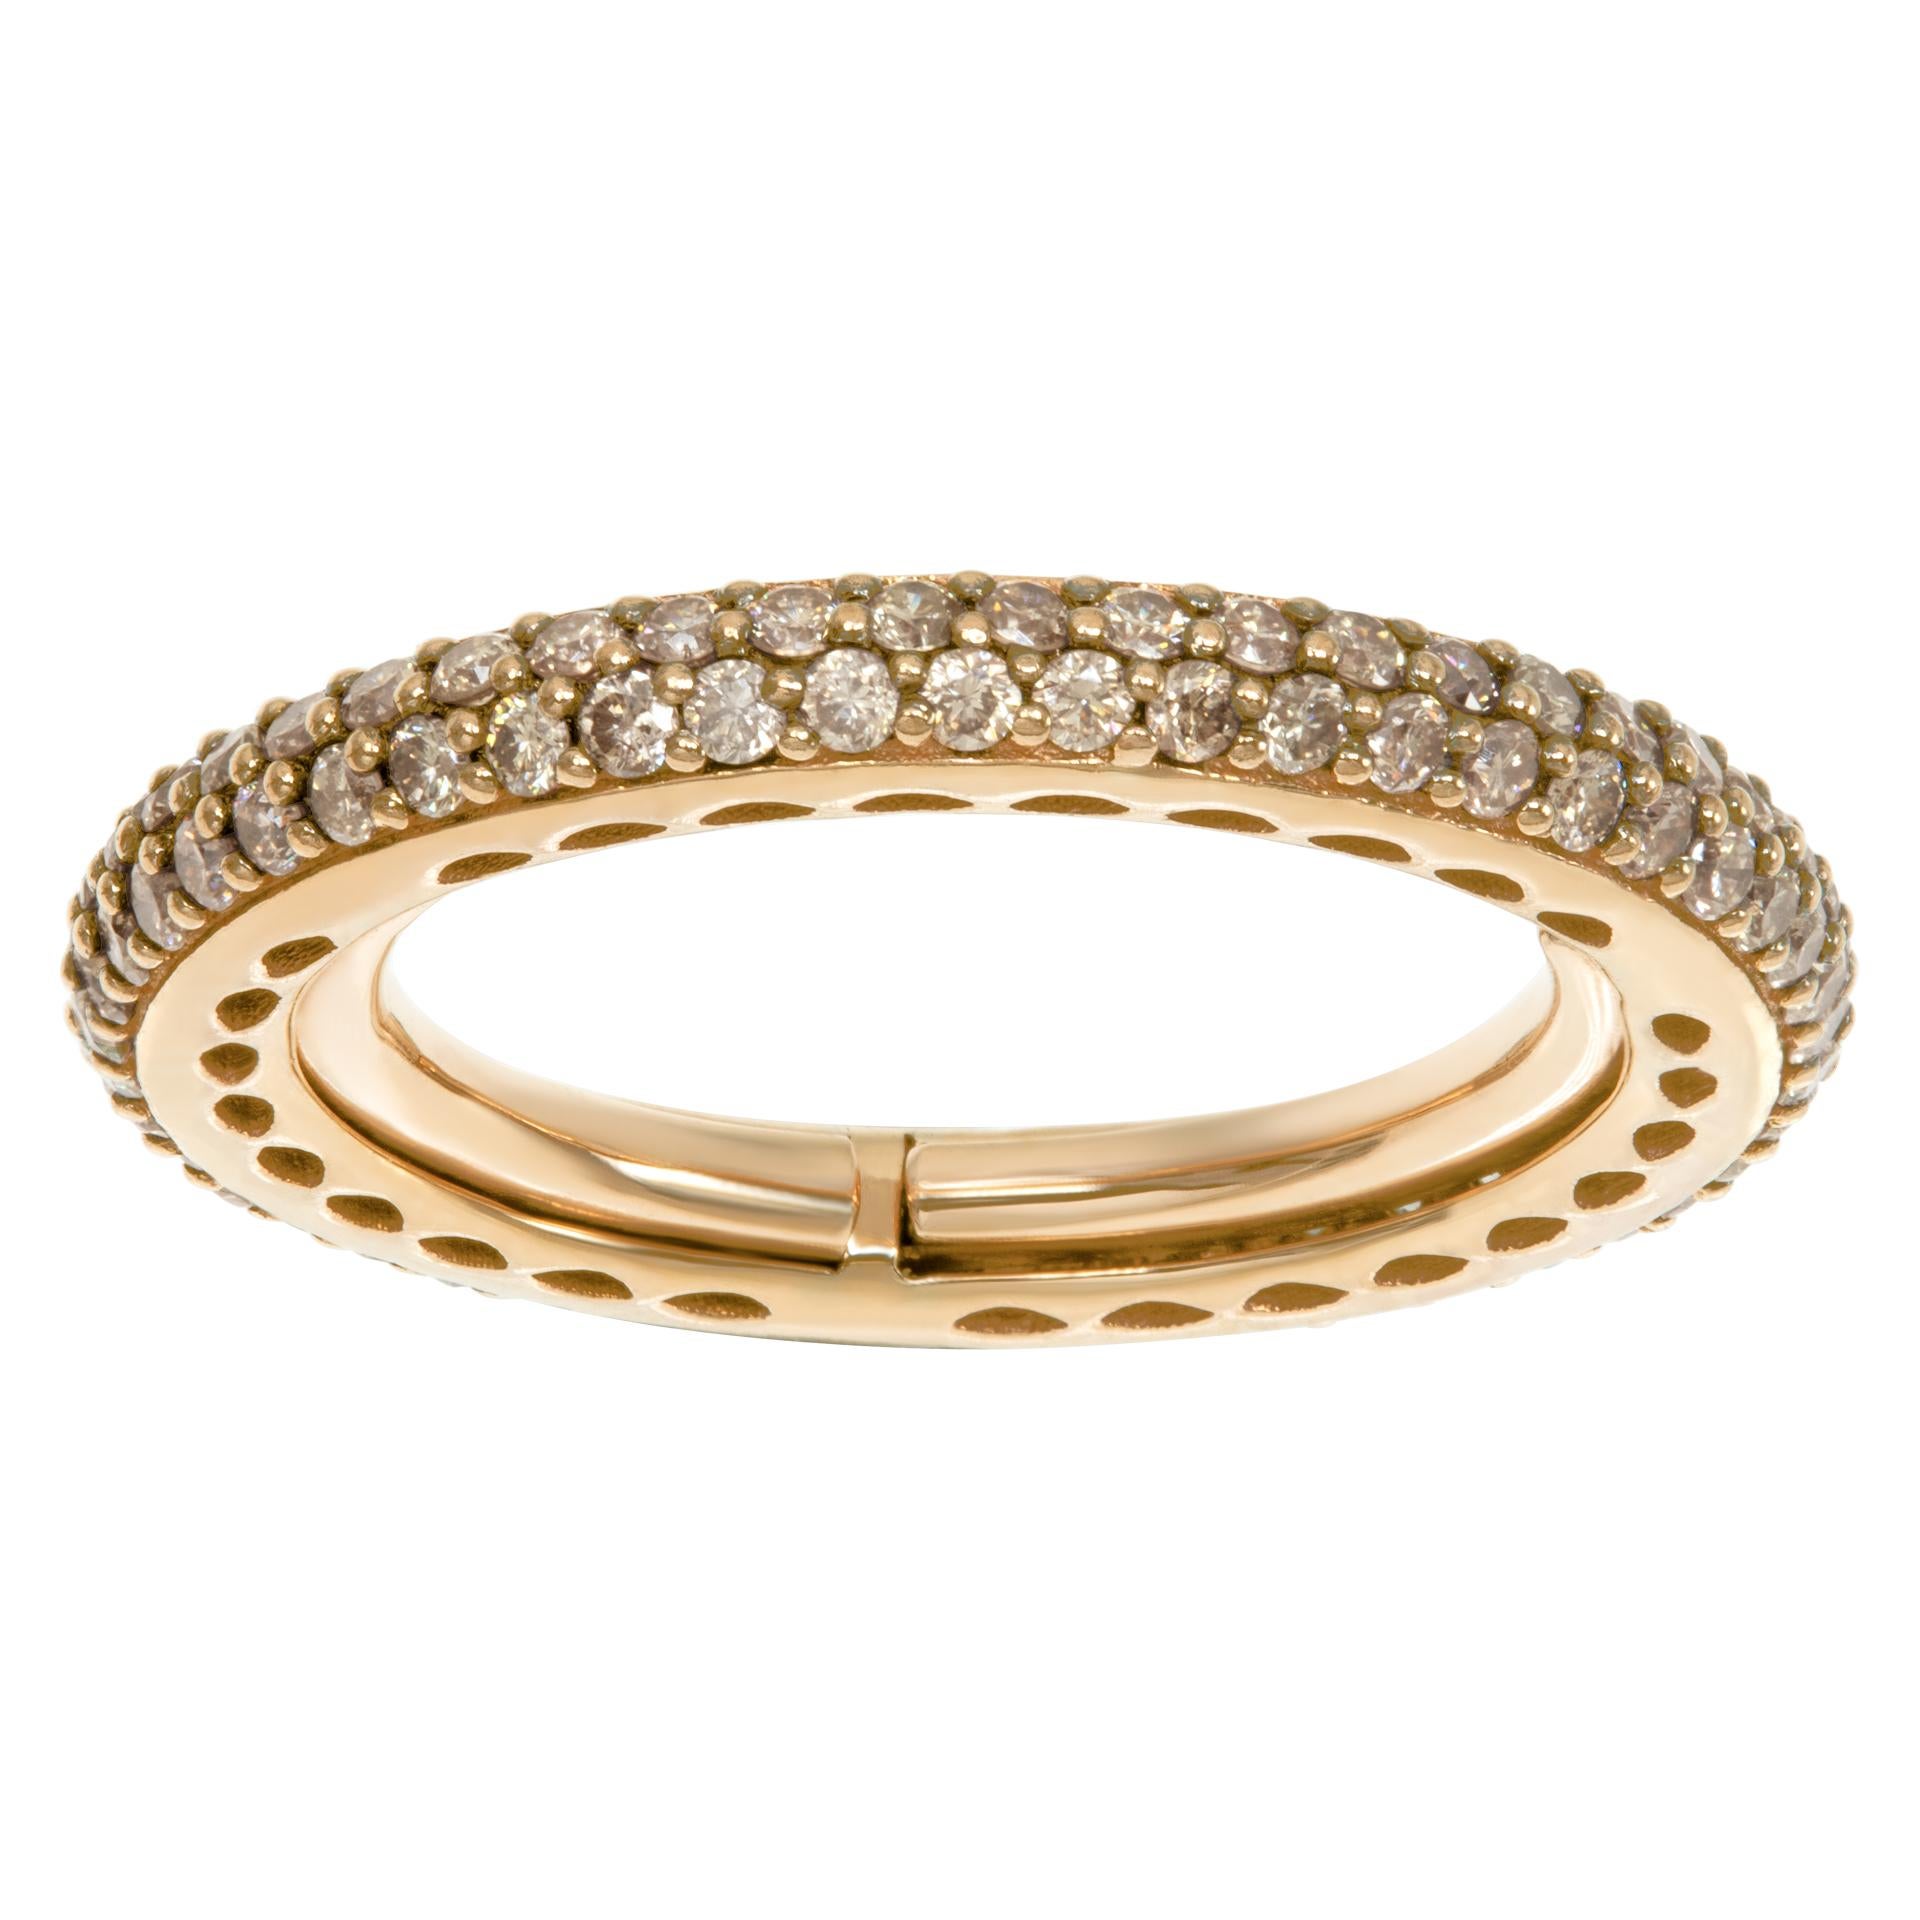 Champaign diamonds eternity band in rose gold.